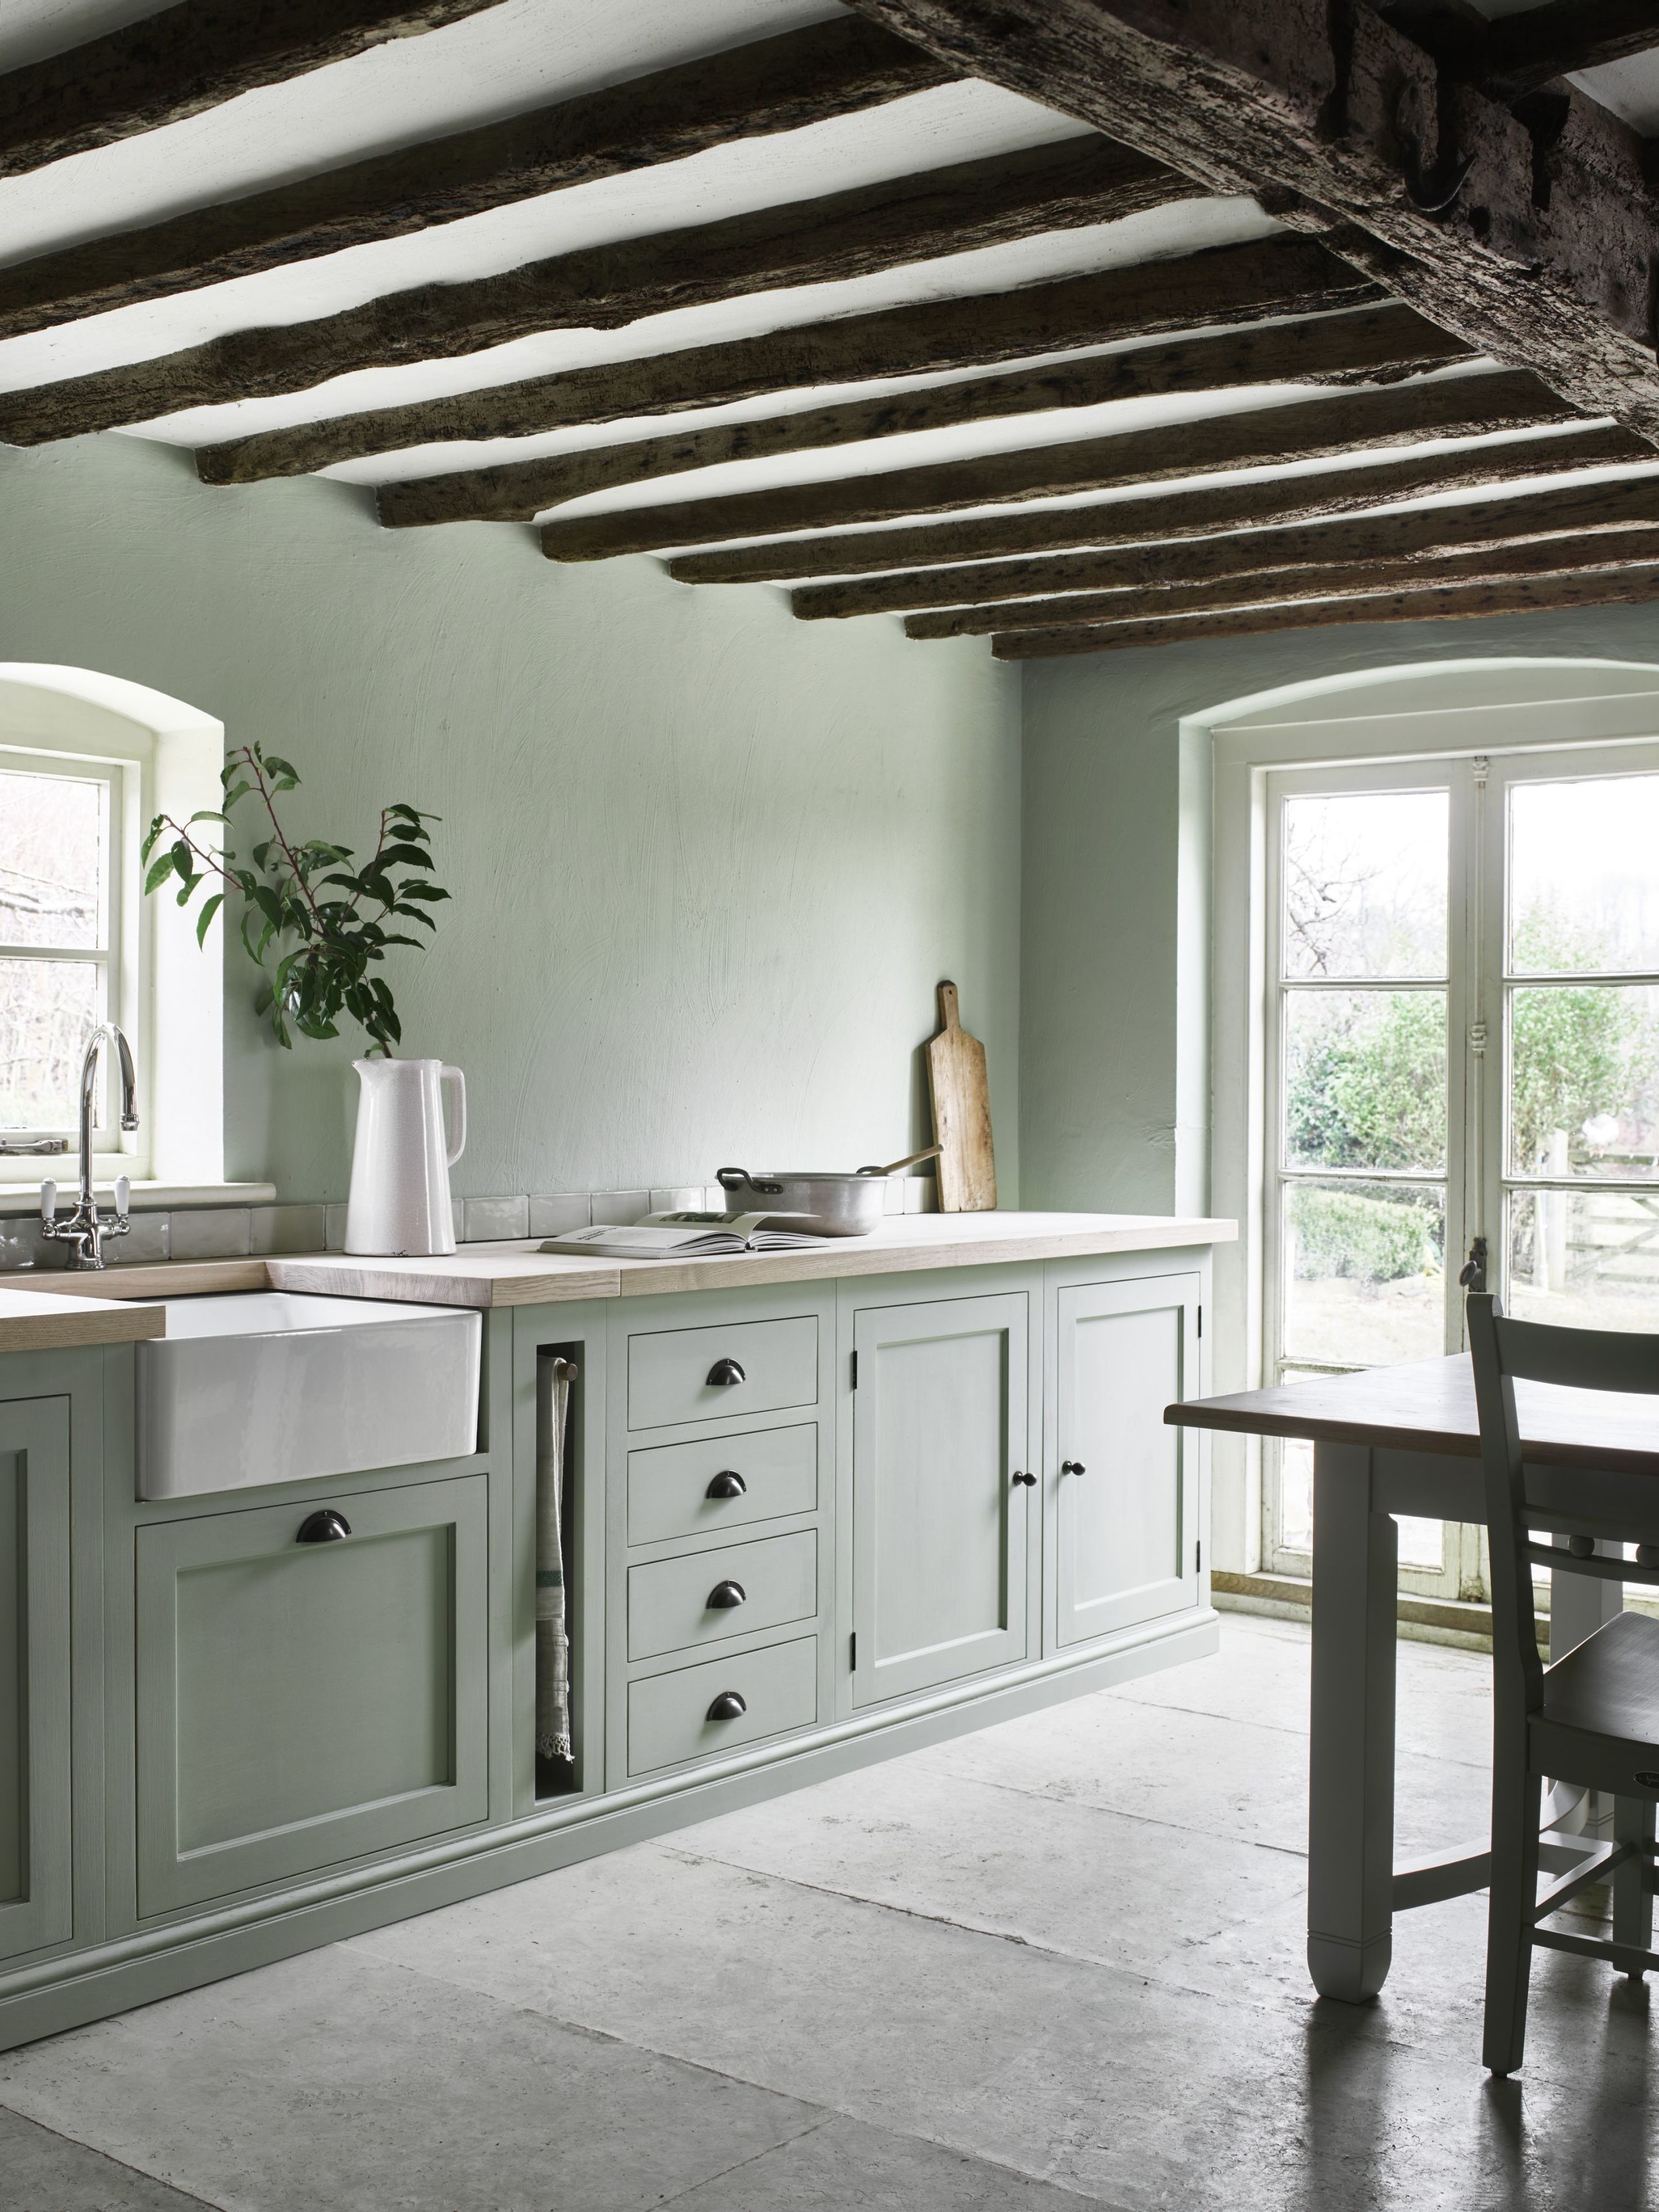 country kitchens neptune henley kitchen hand-painted in sage from £14,000 GLSGSSW